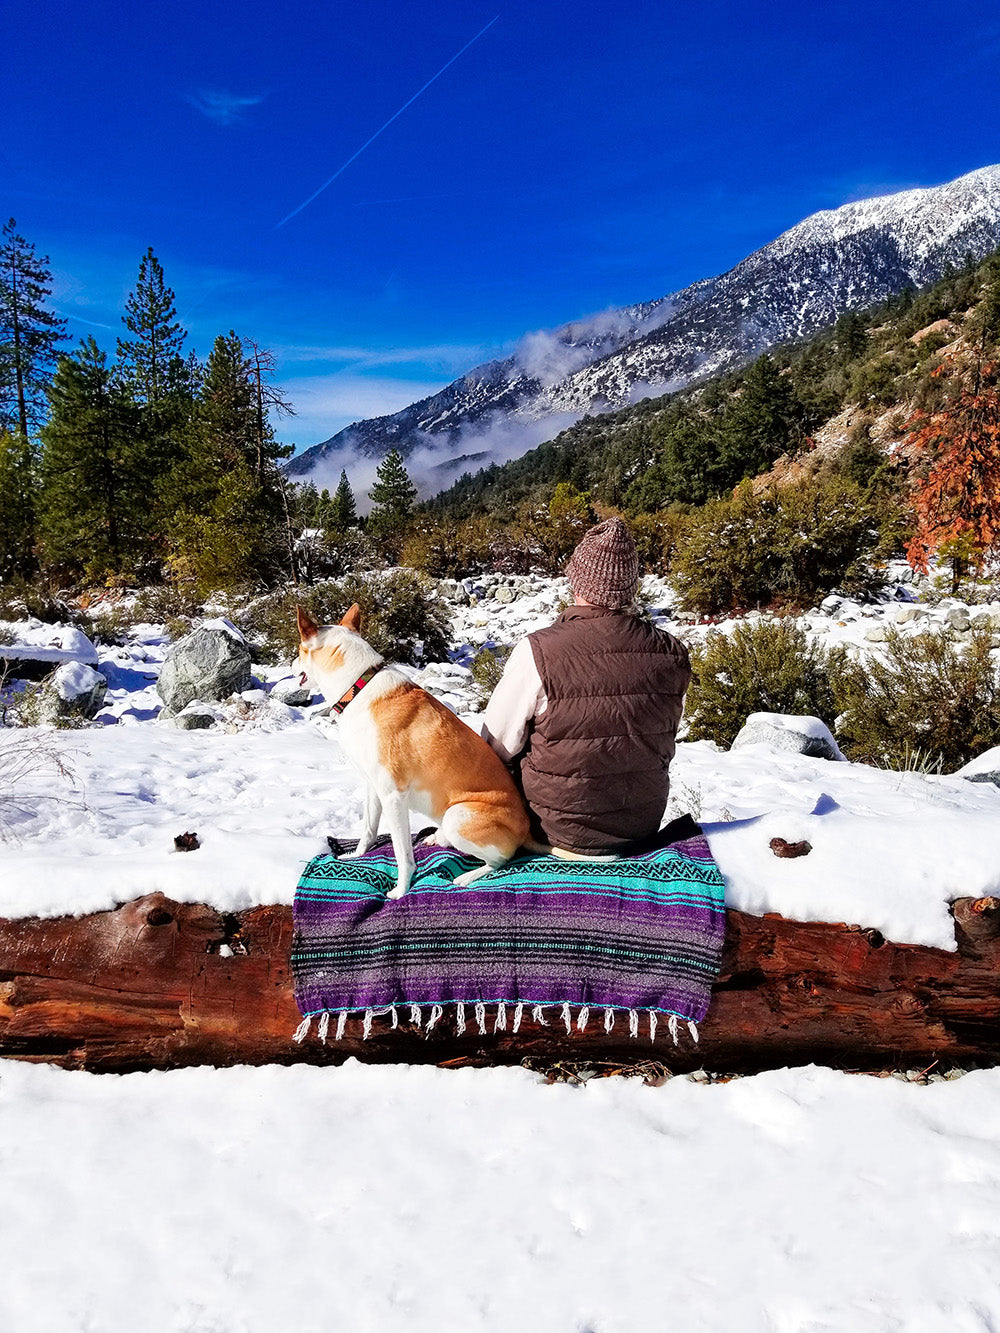 Enjoying a snow day with your best friend. One of life's simple pleasures. via Davis Taylor Trading Co.